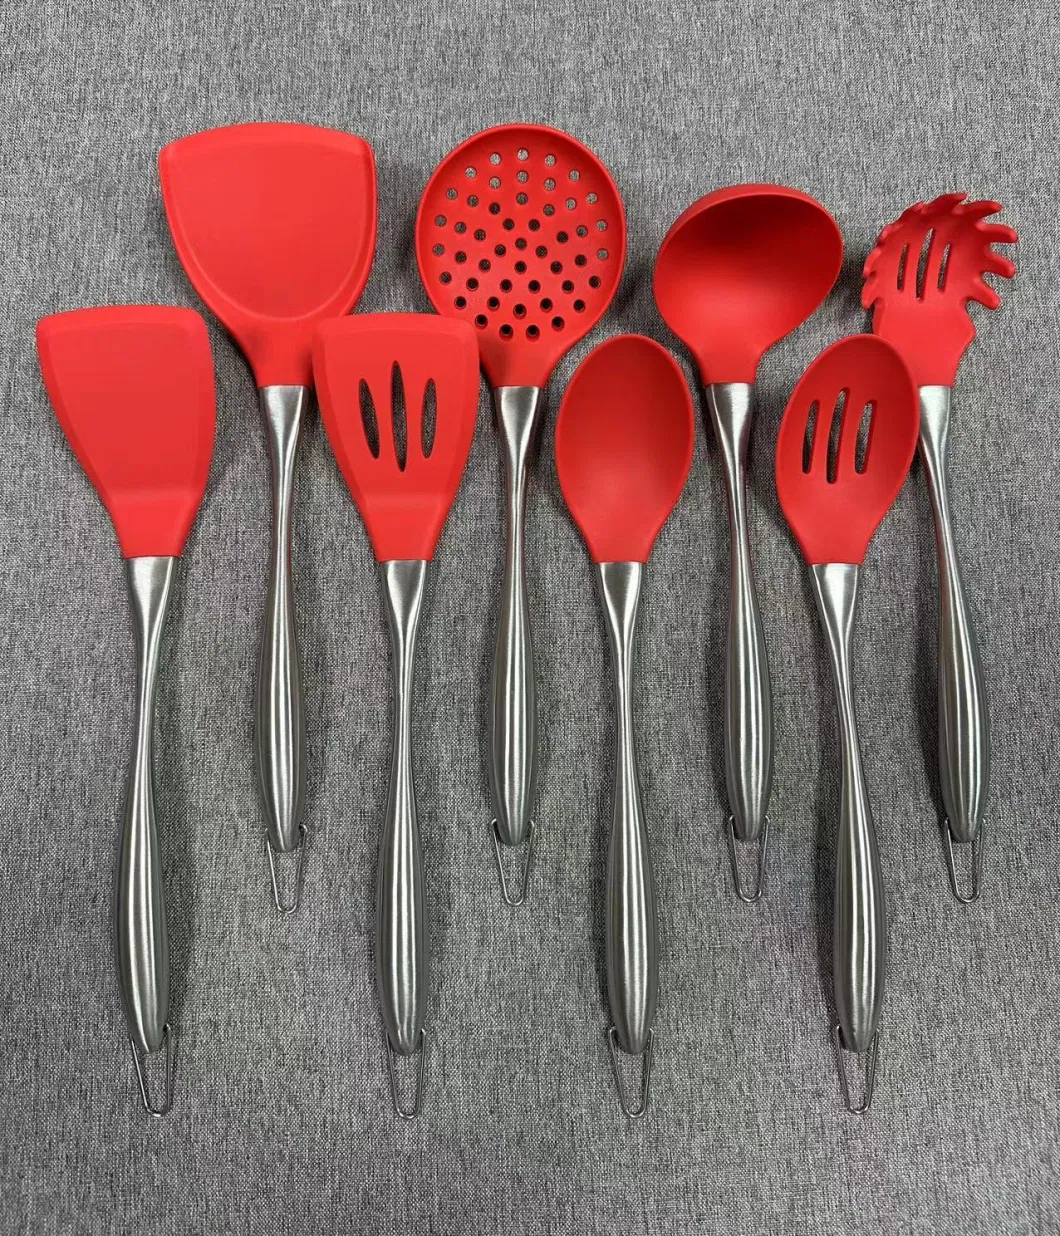 8 PCS High Quality Stainless Steel Handle Kitchen Cooking Silicone Utensil Set